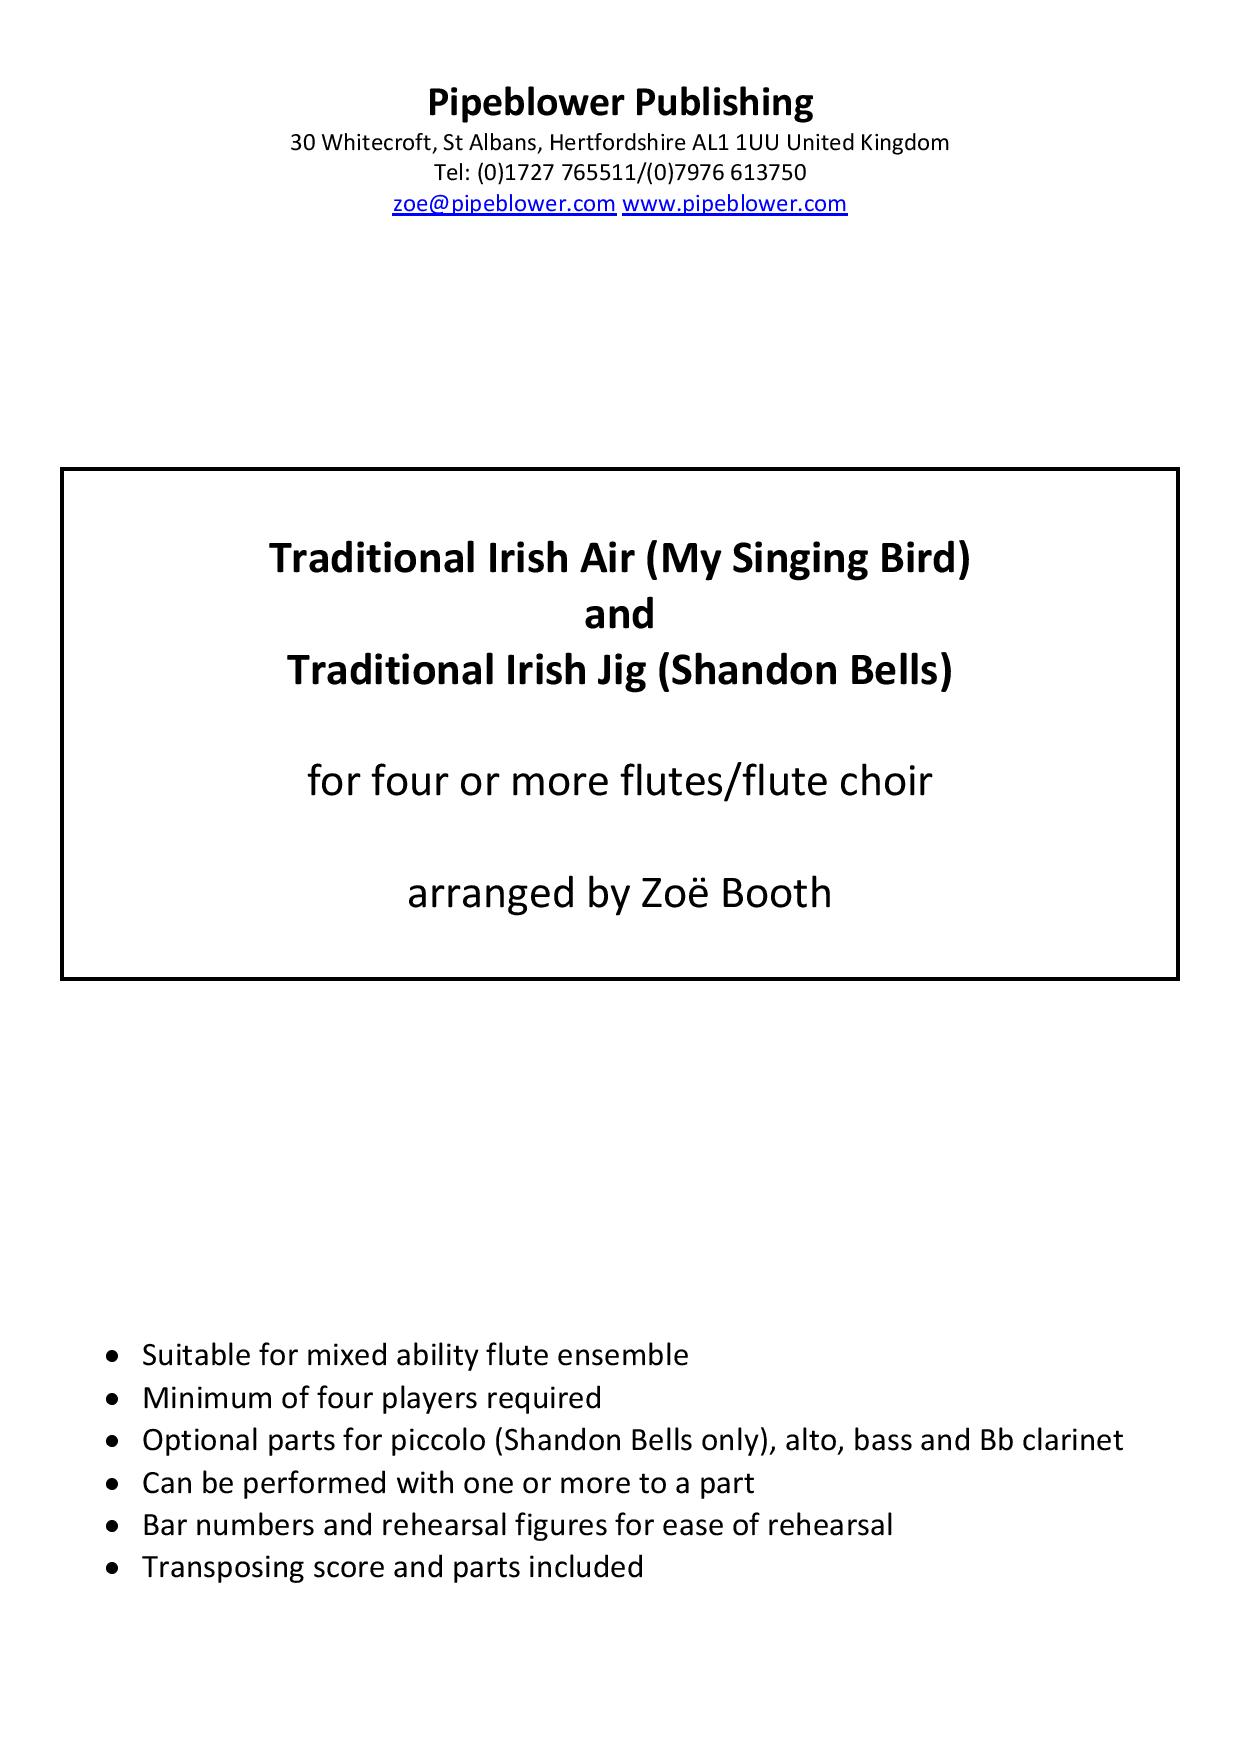 Irish Traditional Air and Jig,  arranged by Zoë Booth for four or more flutes/flute choir